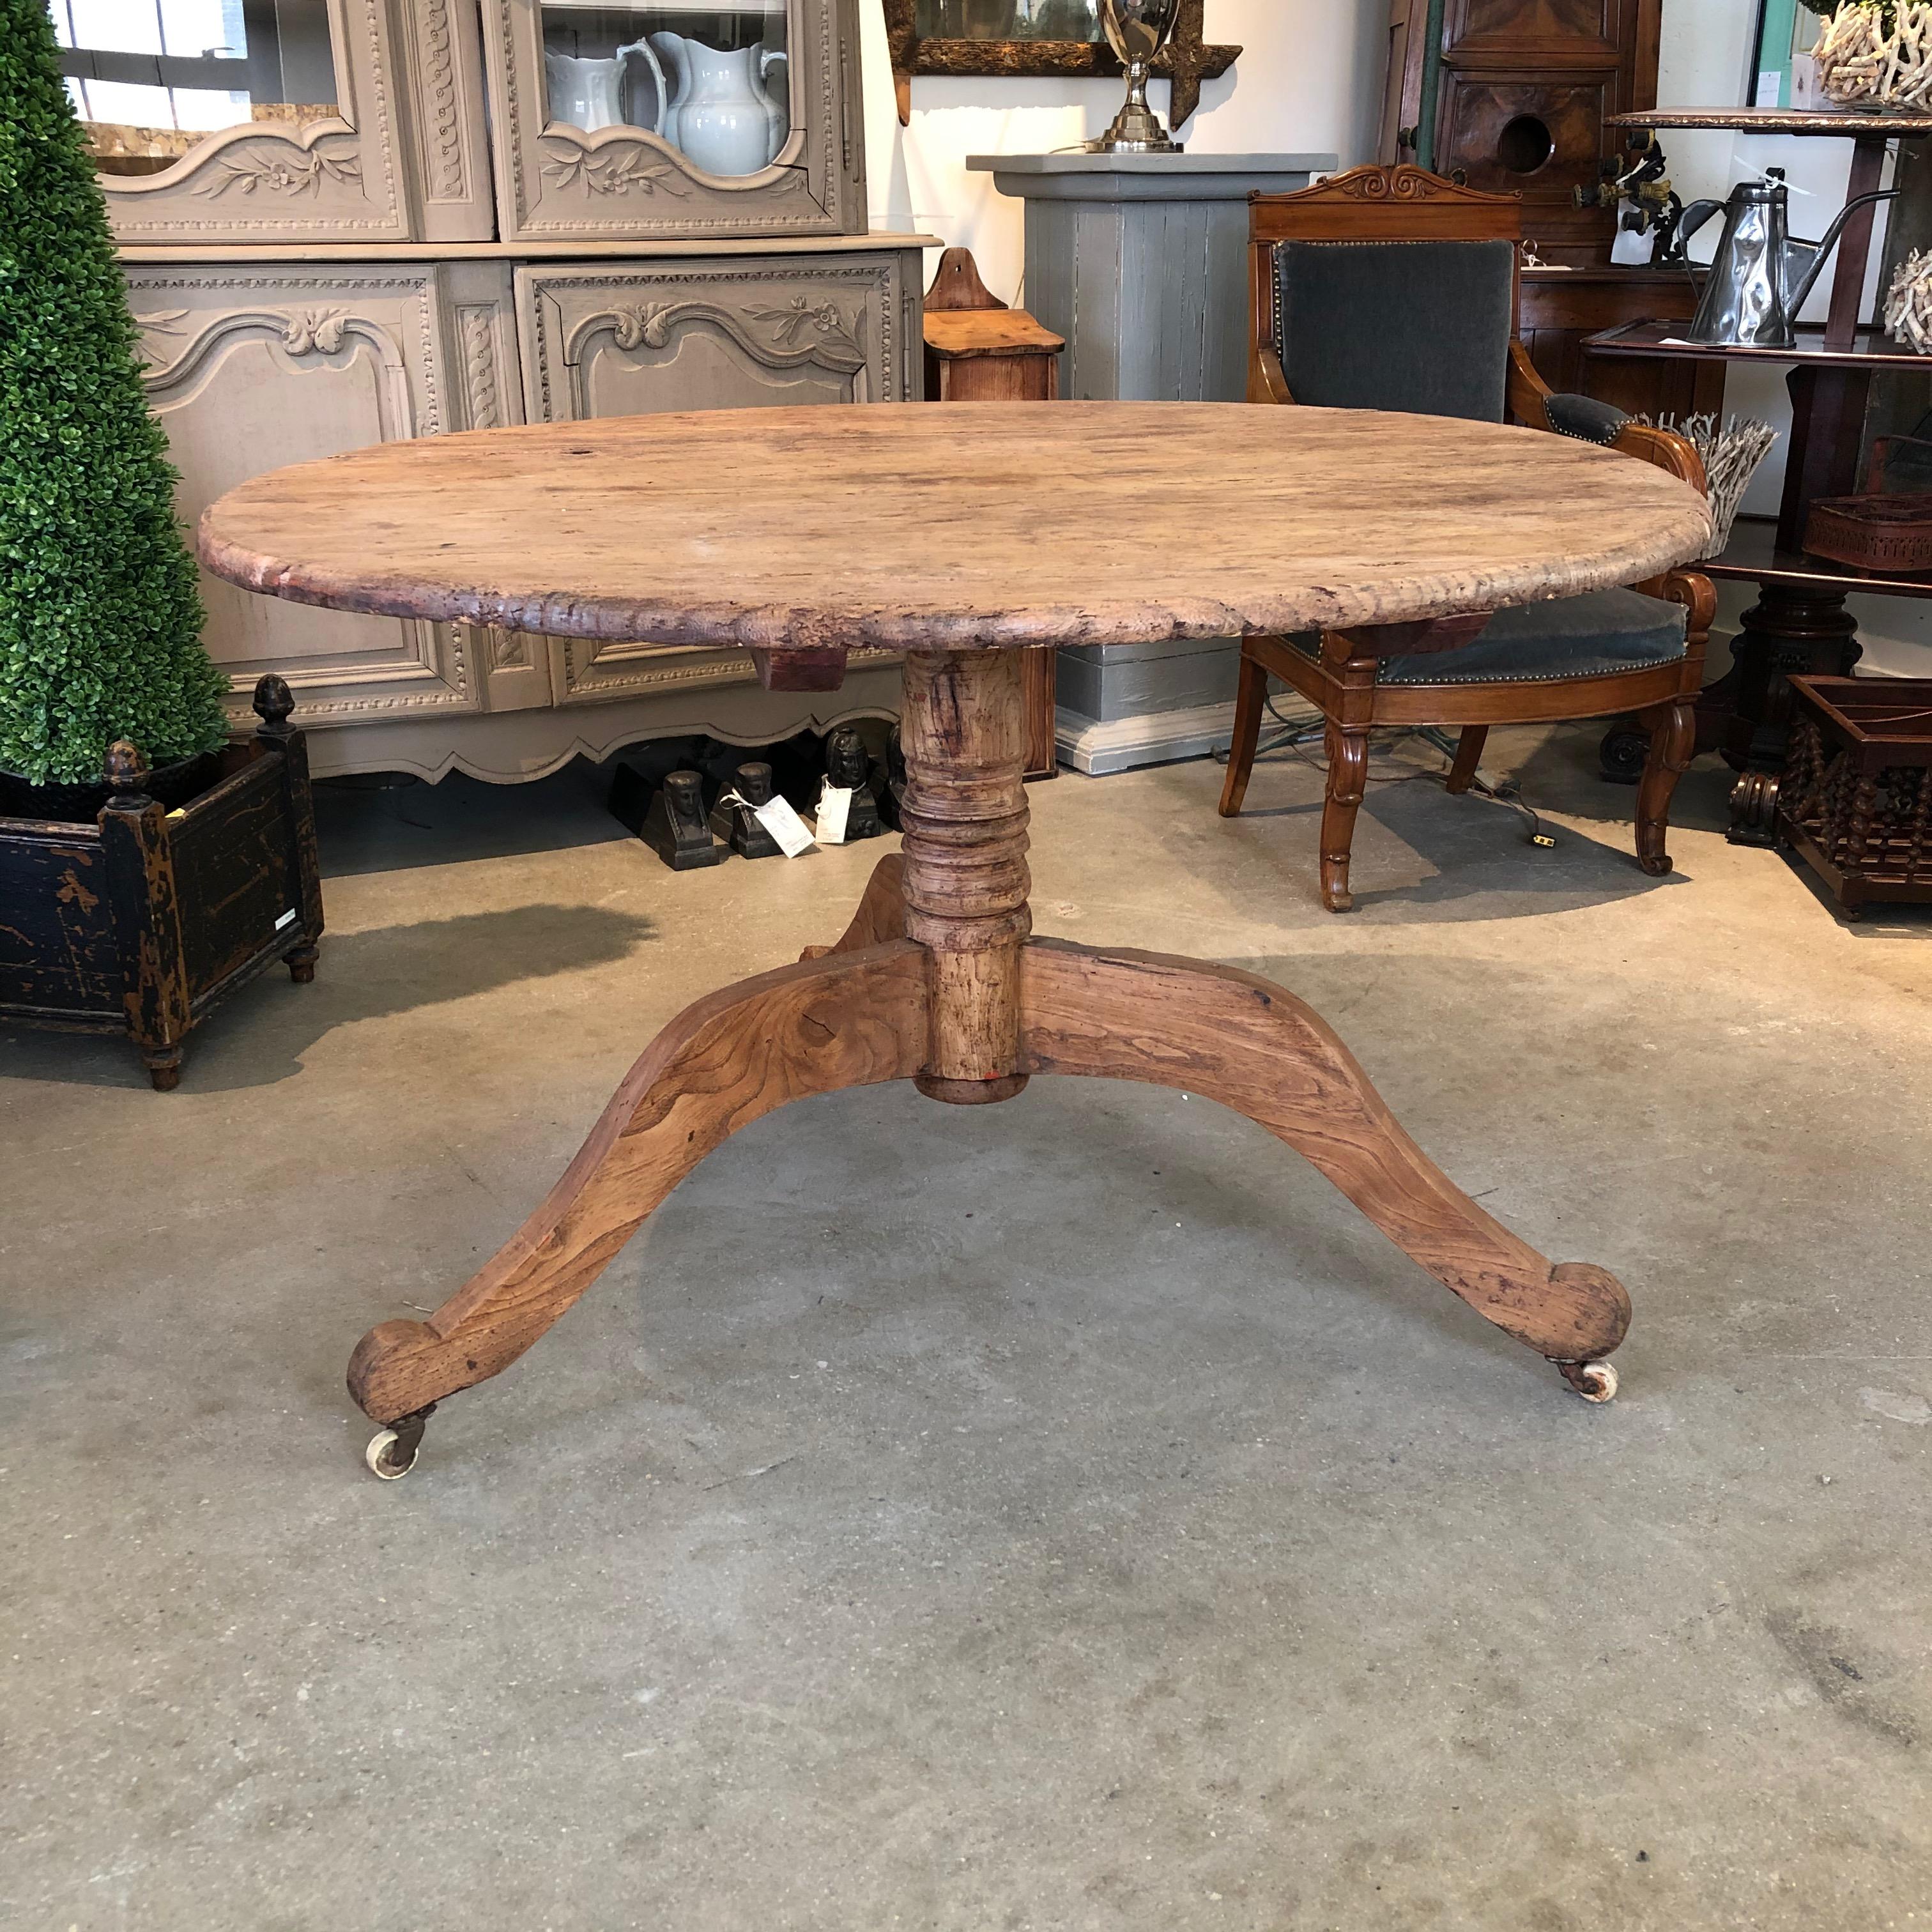 19th century Swedish Primitive pedestal table. Newly stabilized.